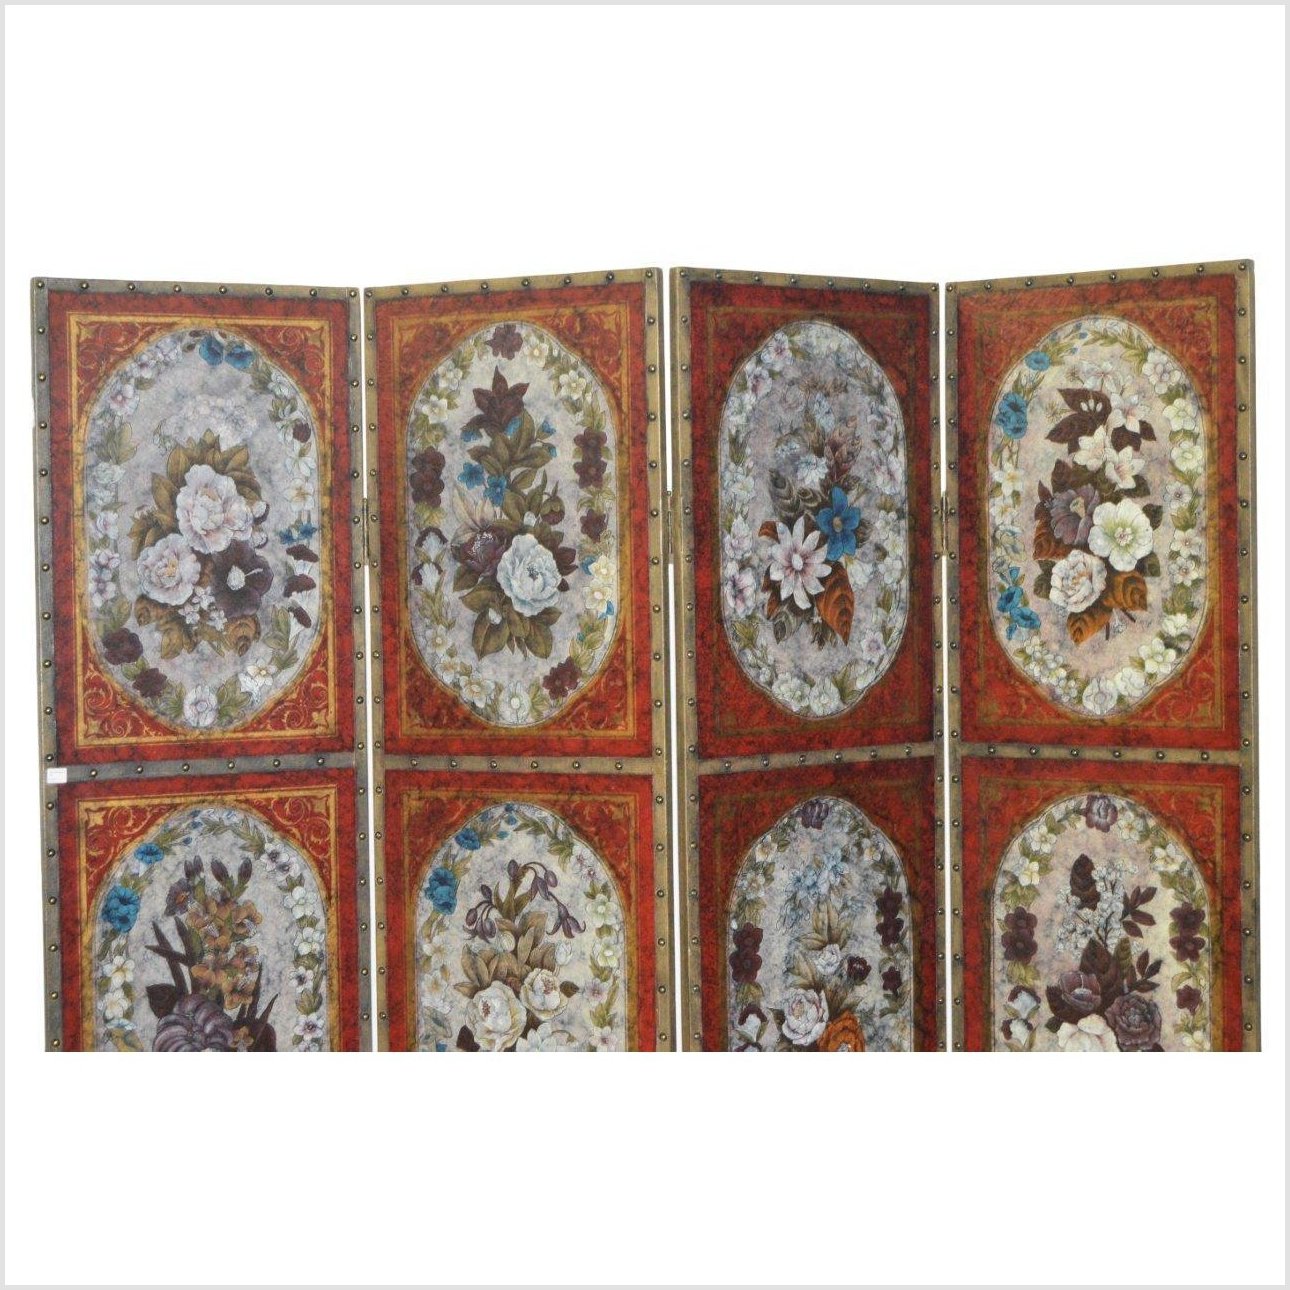 4-Panel Screen with Victorian Style Floral Design-YN2773-5. Asian & Chinese Furniture, Art, Antiques, Vintage Home Décor for sale at FEA Home